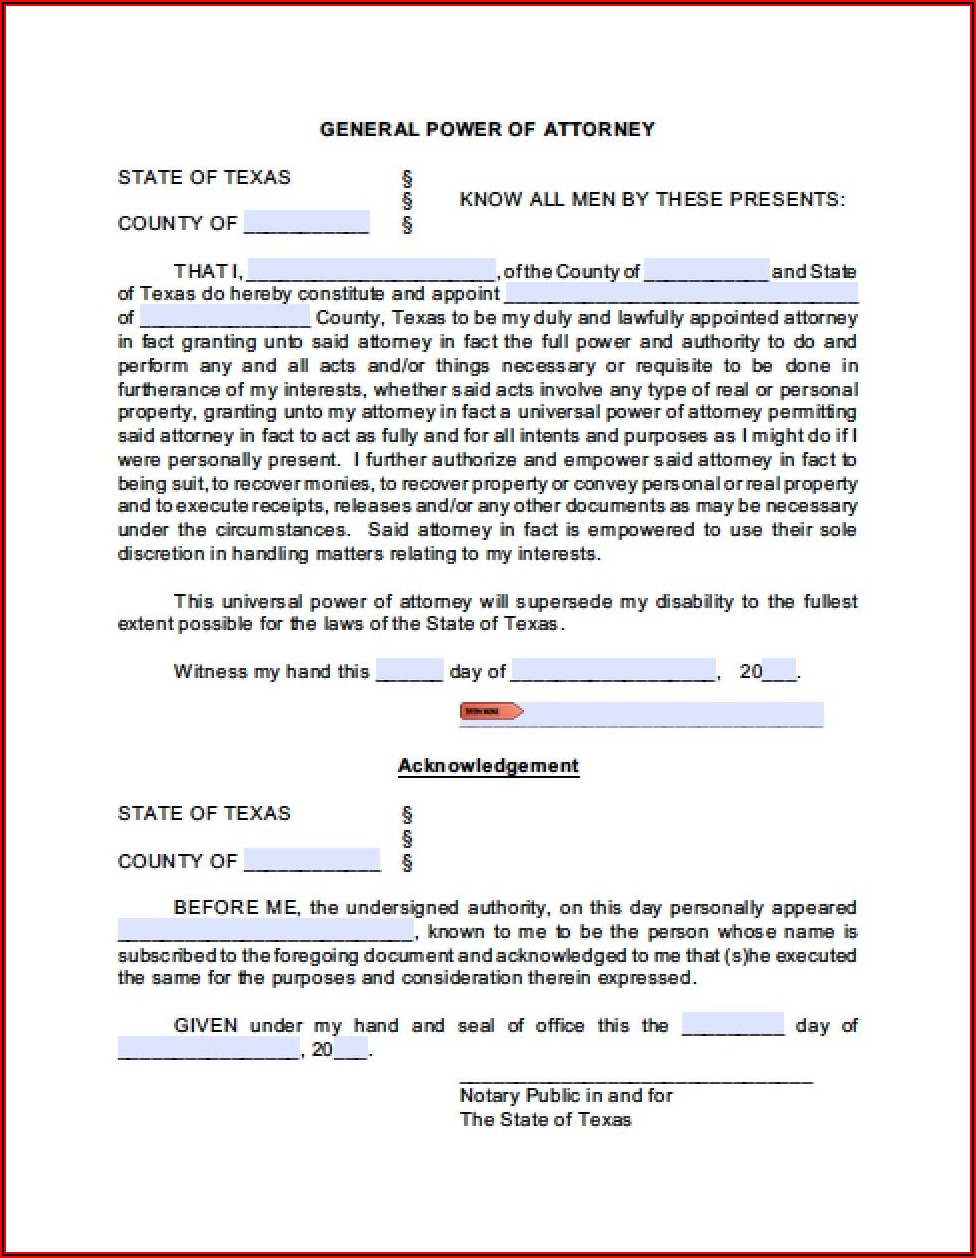 Notary Public Acknowledgement Form Texas